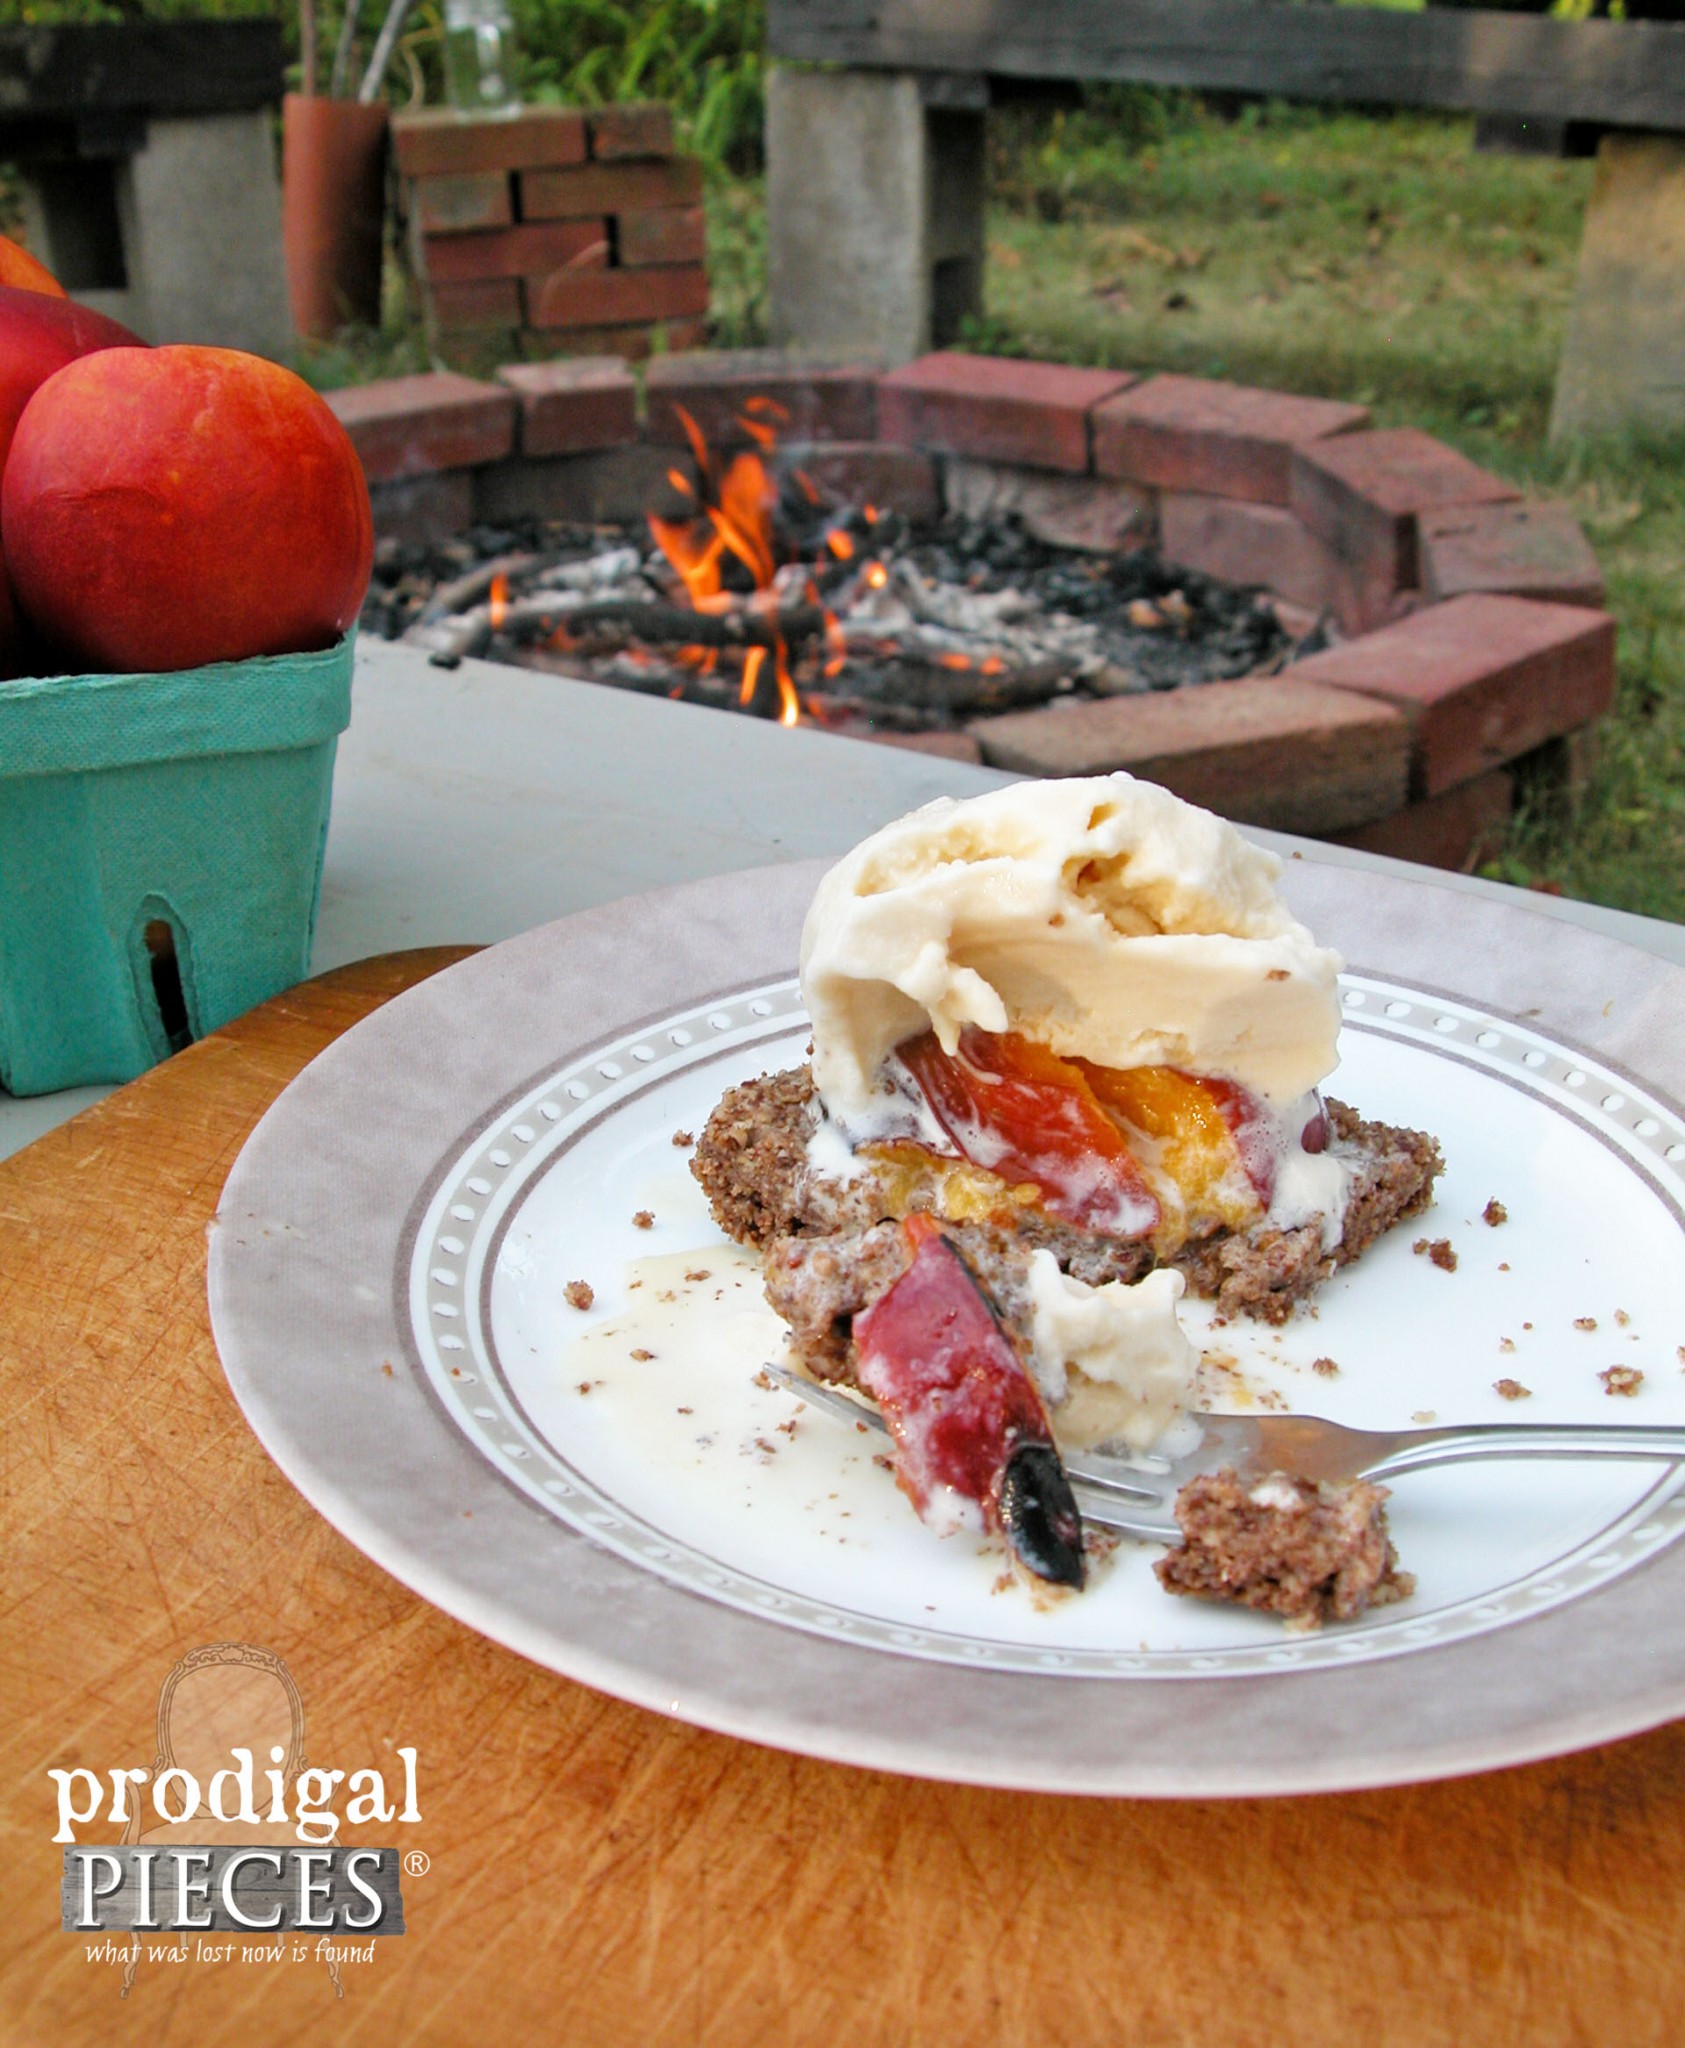 Fire Roasted Stone Fruit on Grain & Gluten Free Crust Topped with Homemade Raw Milk Ice Cream by Prodigal Pieces | www.prodigalpieces.com